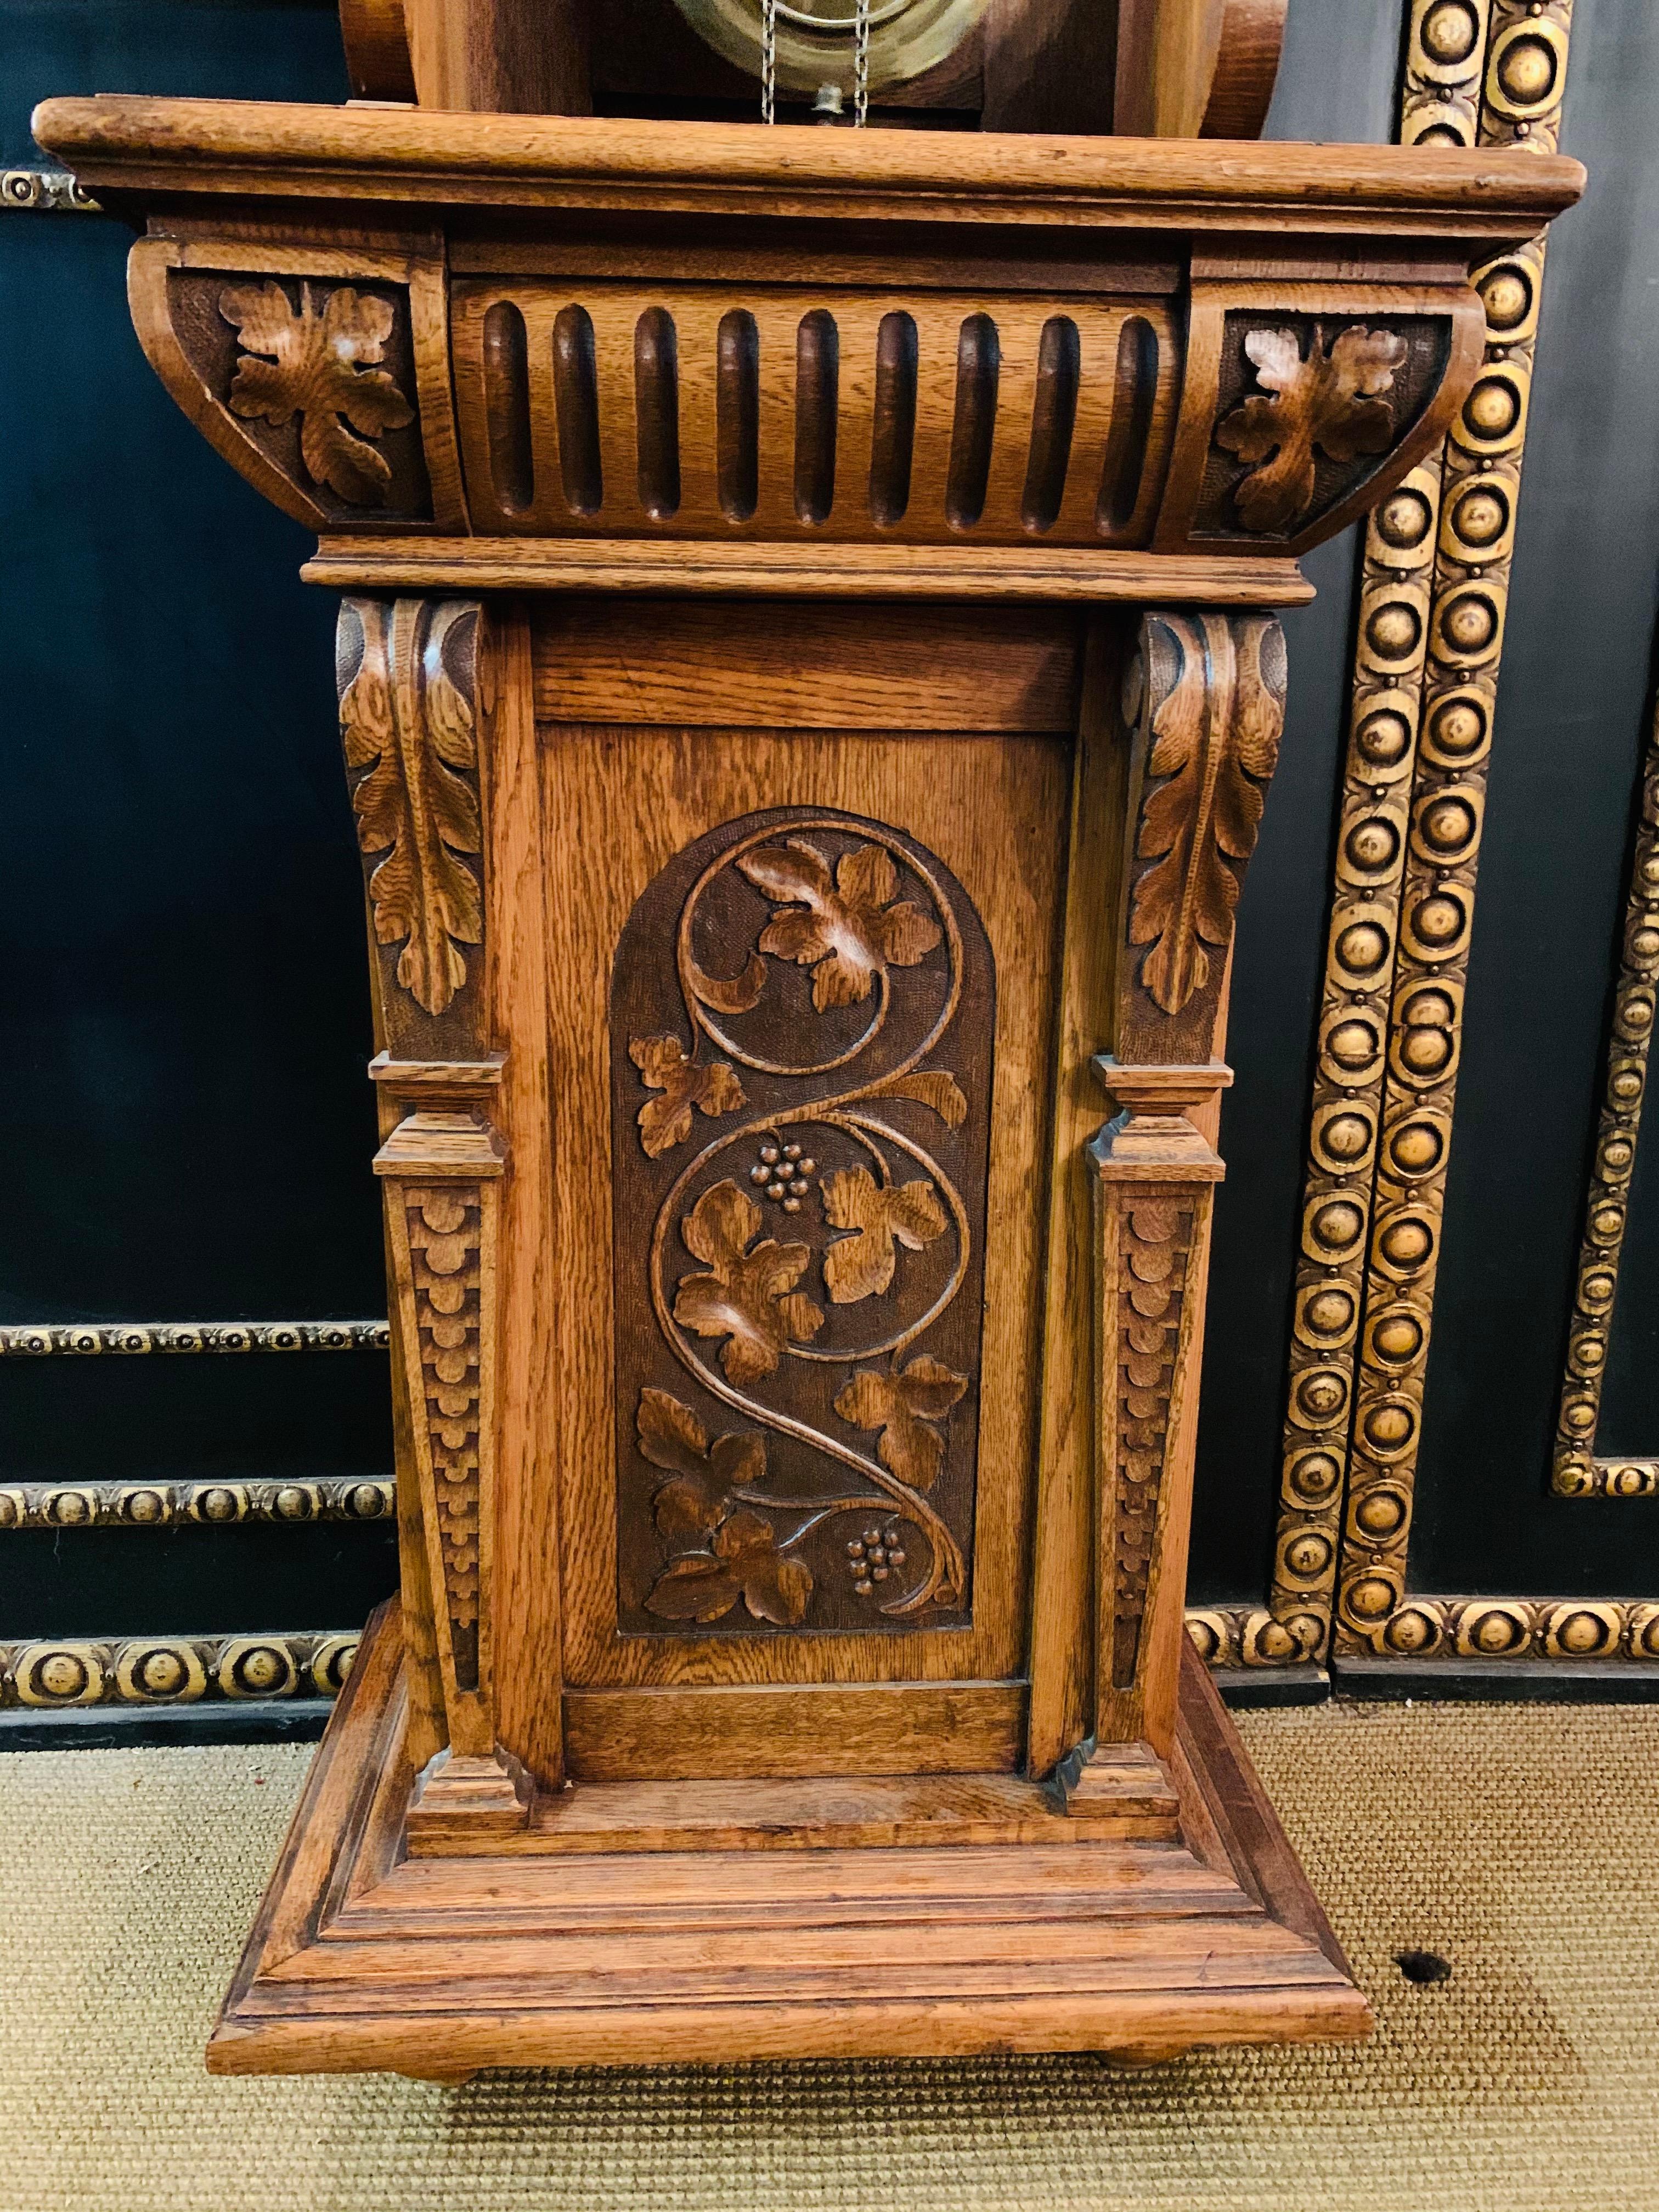 Grandfather clock made of oak Victorian style circa 1880 cantilever, elaborately carved, with grapevines and oak leaves, crowned with a gallery of turned columns, 2-colored dial with Arab. Numerals and blackened hands, clockwork with 1/2 hour